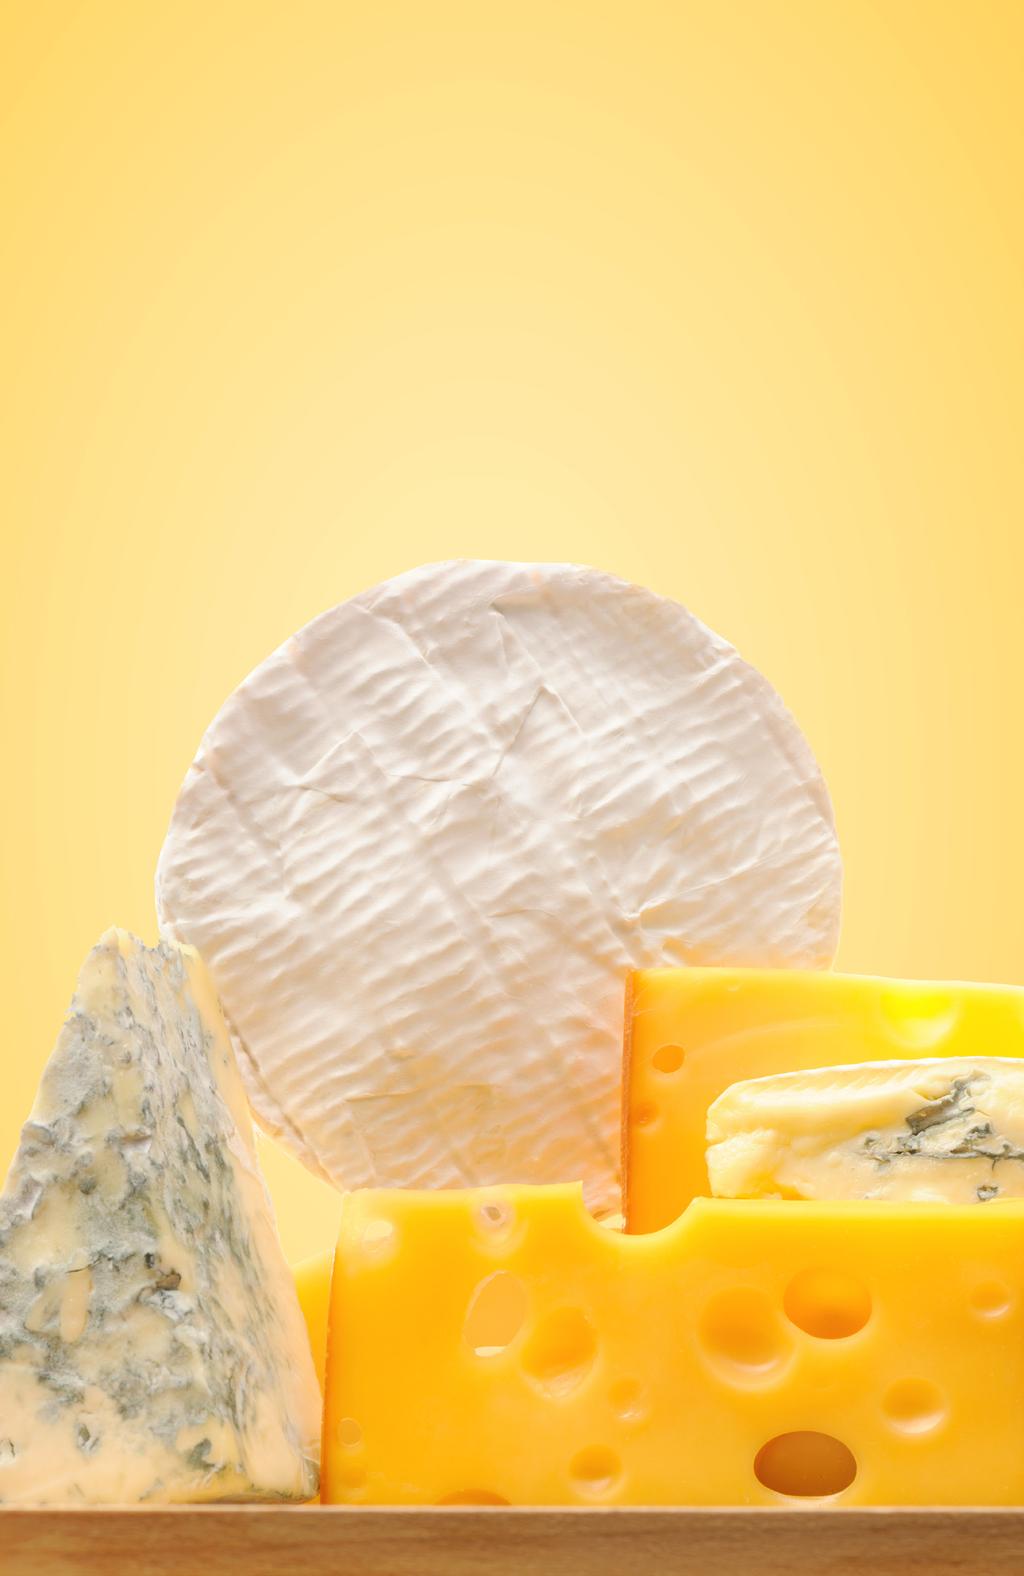 Dispelling Myths HOW WELL DO YOU KNOW CHEESE? The food is rich in nutrition and secrets. We separate fact from fiction. Fiction: The saturated fat found in cheese contributes to heart disease.